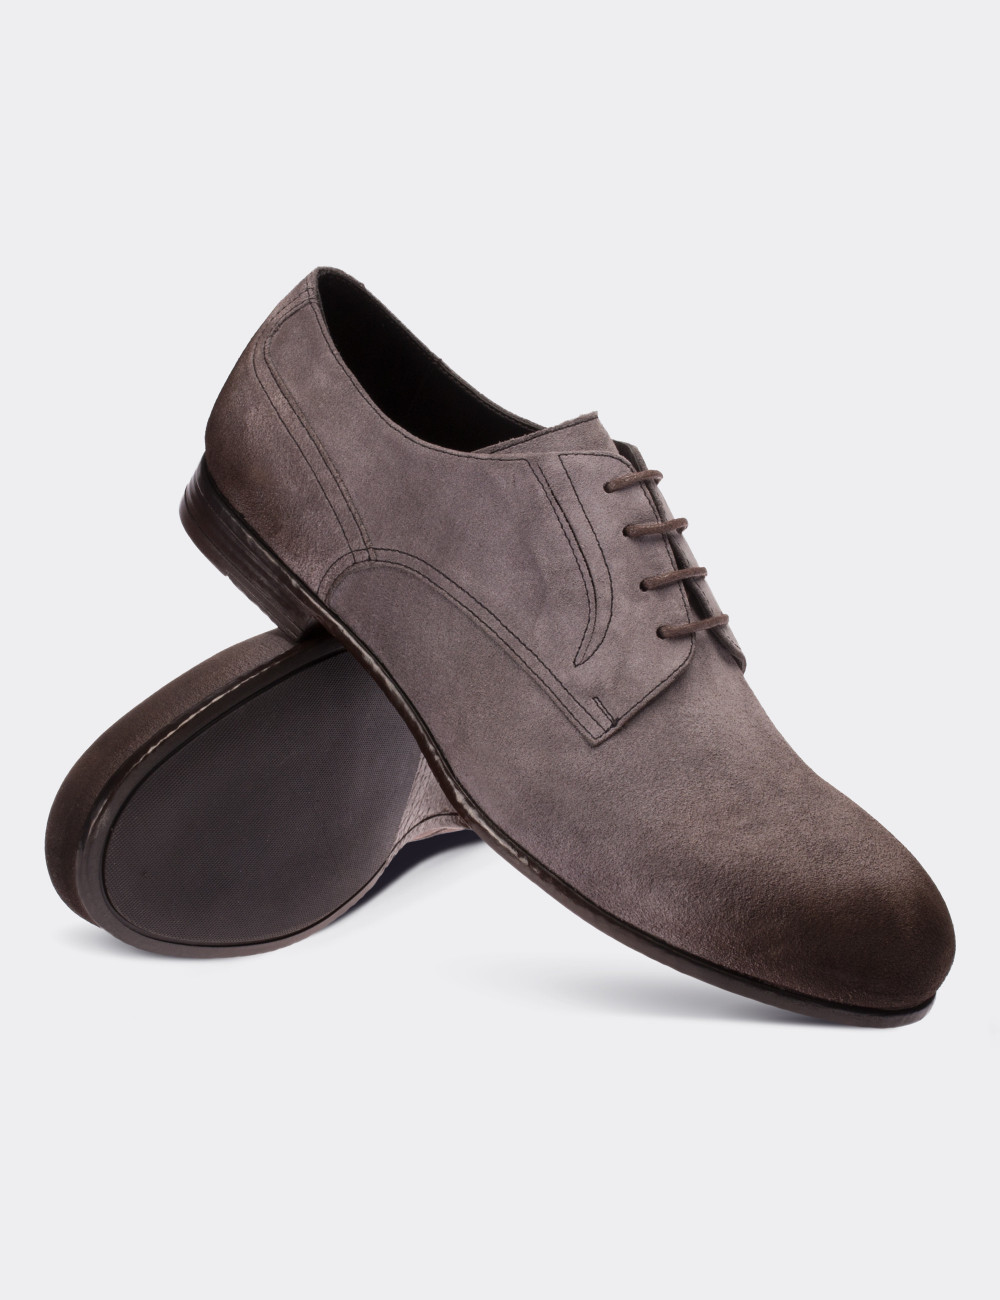 Gray Suede Leather Lace-up Shoes - 01294MGRIC01